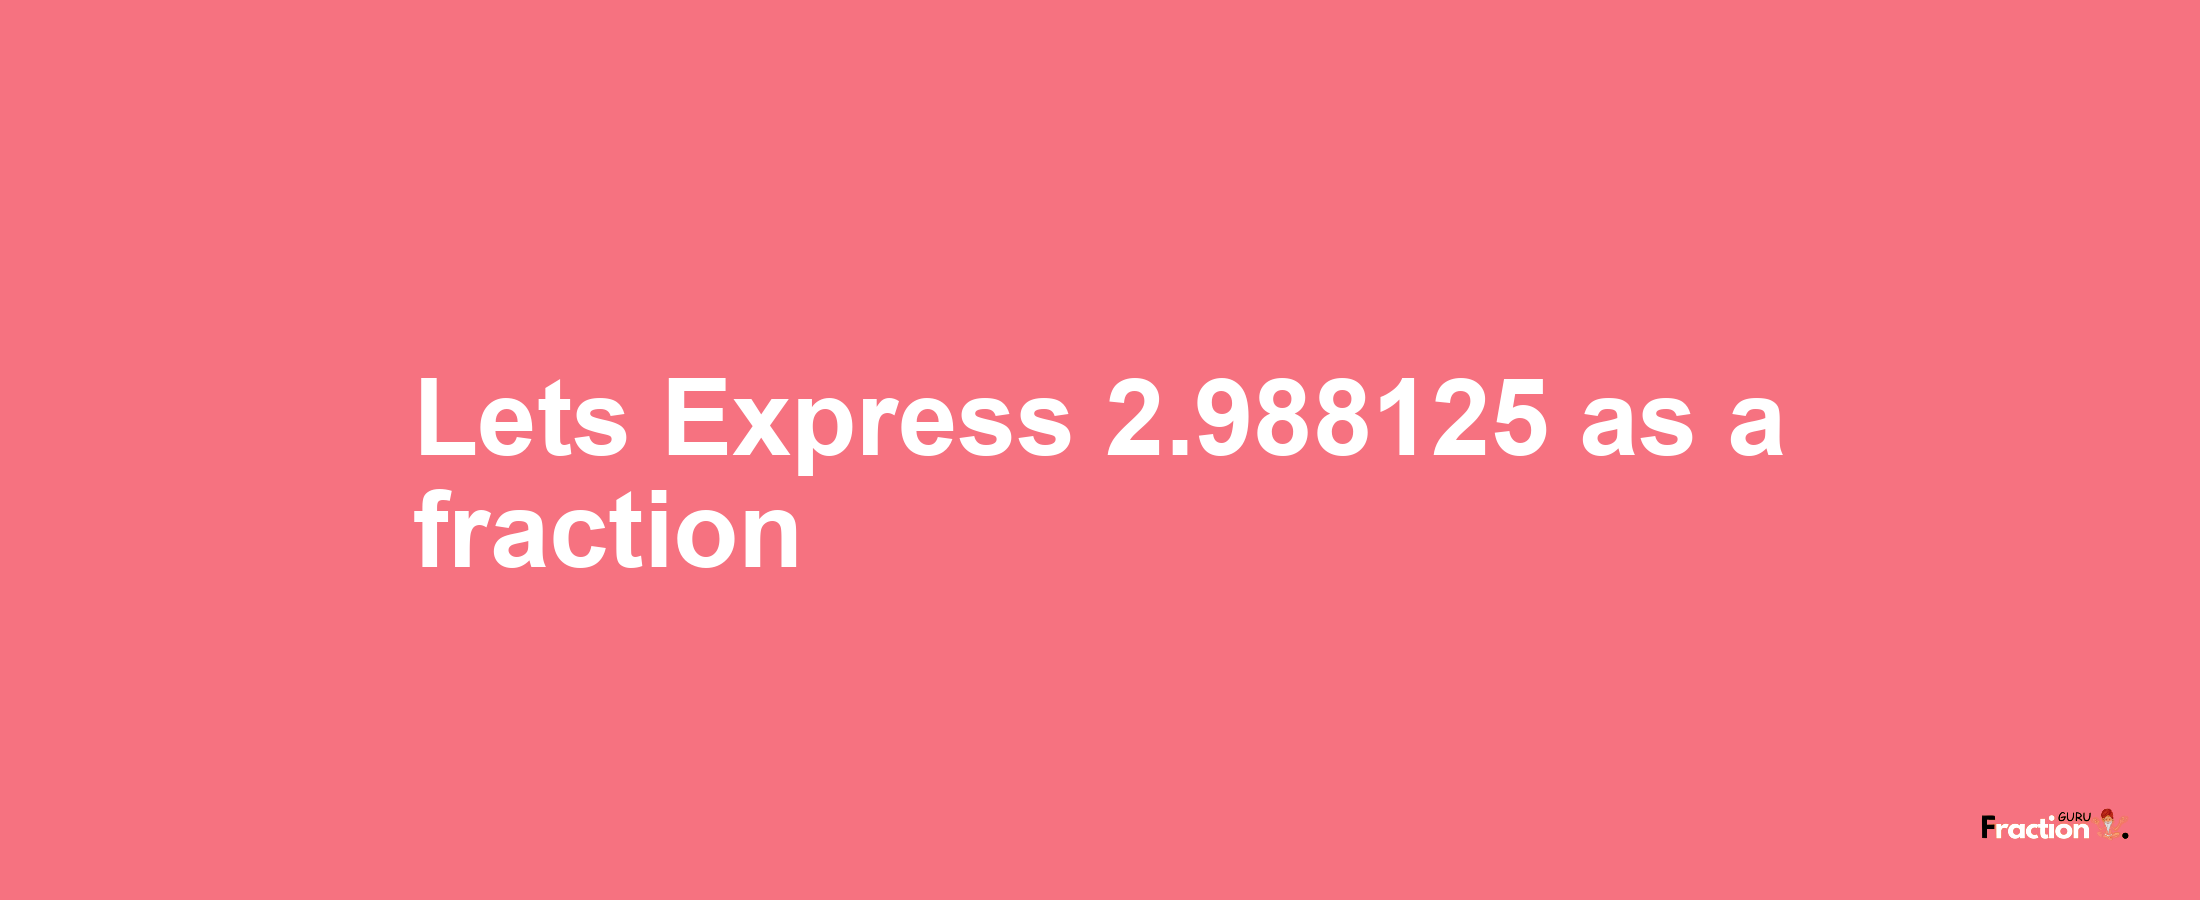 Lets Express 2.988125 as afraction